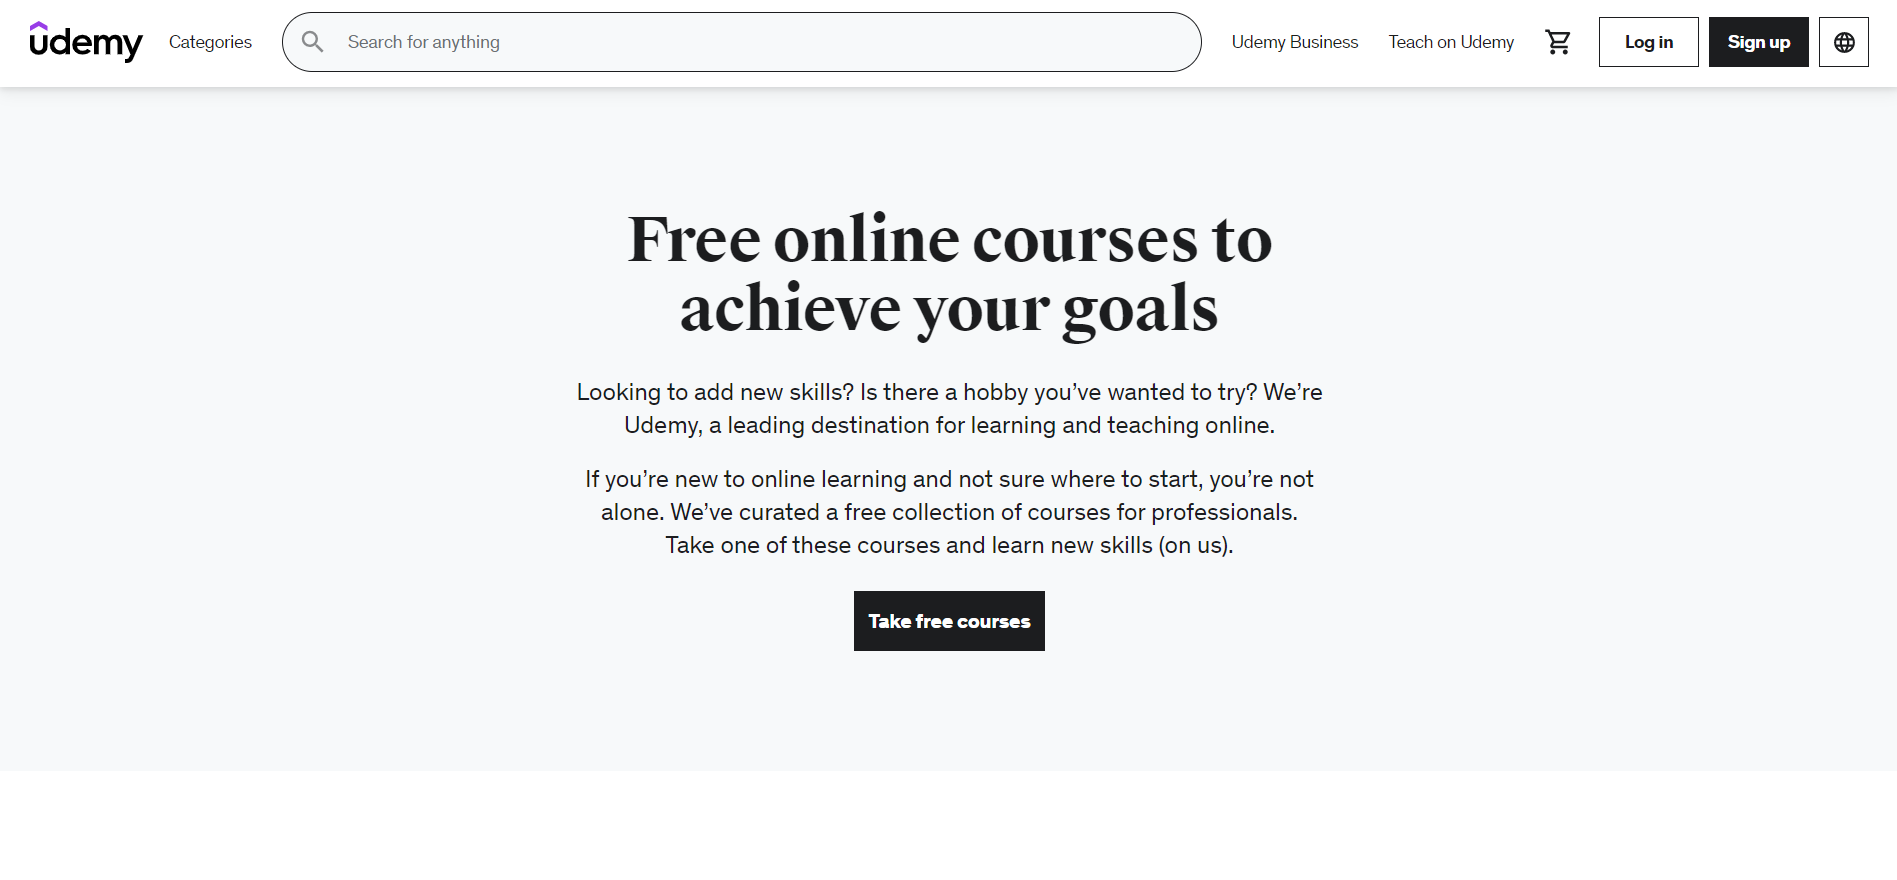 Udemy free courses section.